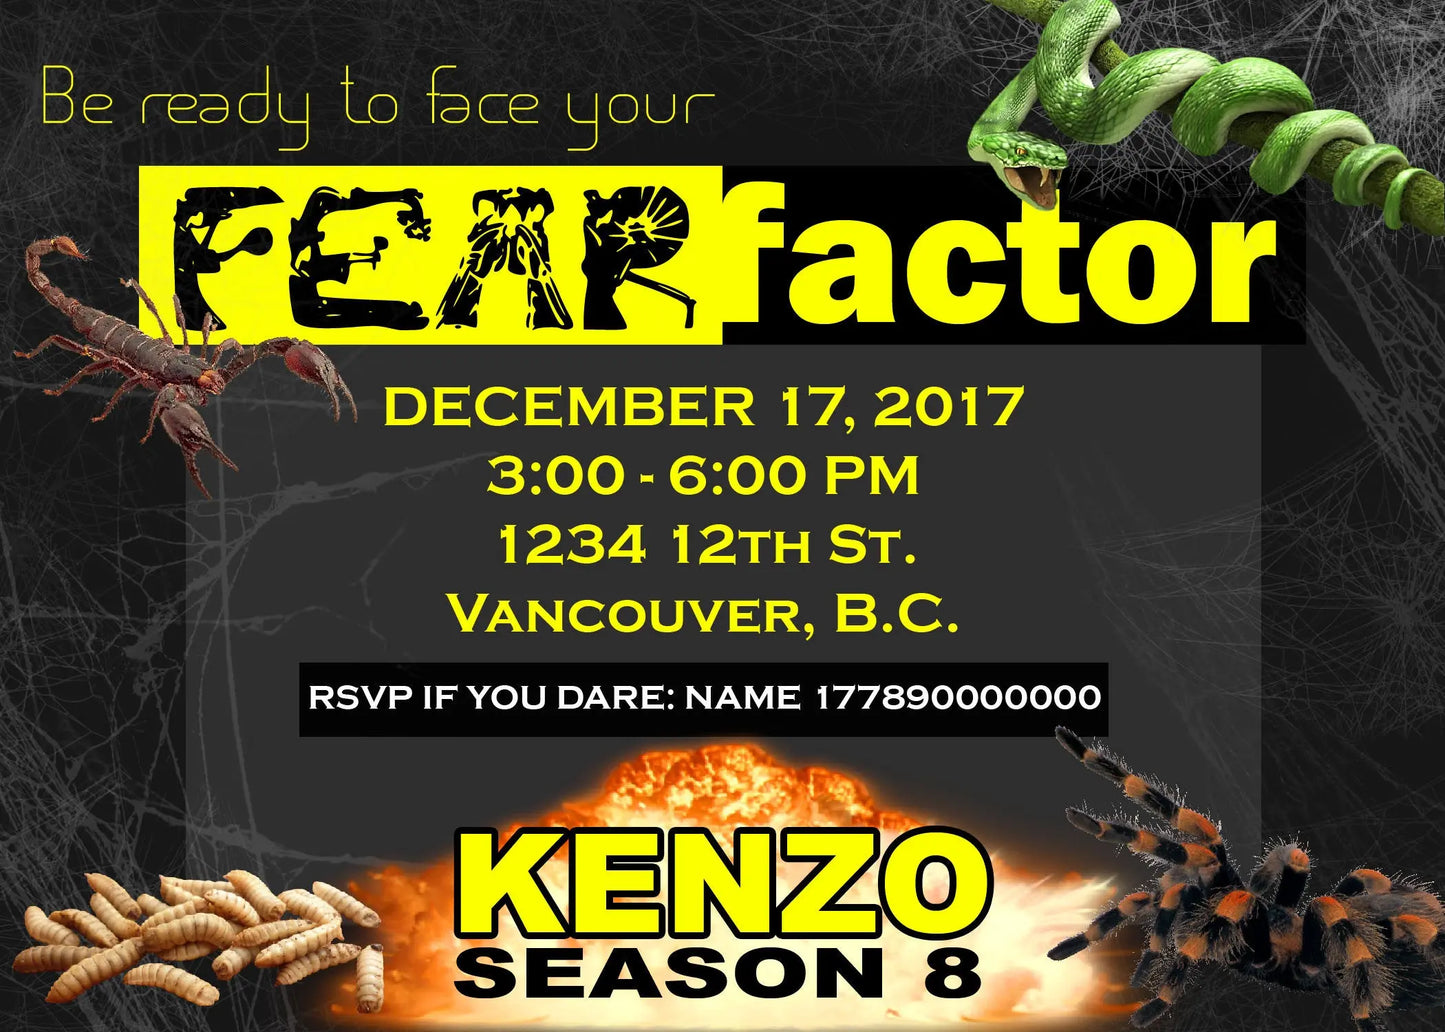 Fear Factor Theme - Unique Invites Personalized Boy Party - Birthday Theme Party Invitations - DIGITAL or PRINTED